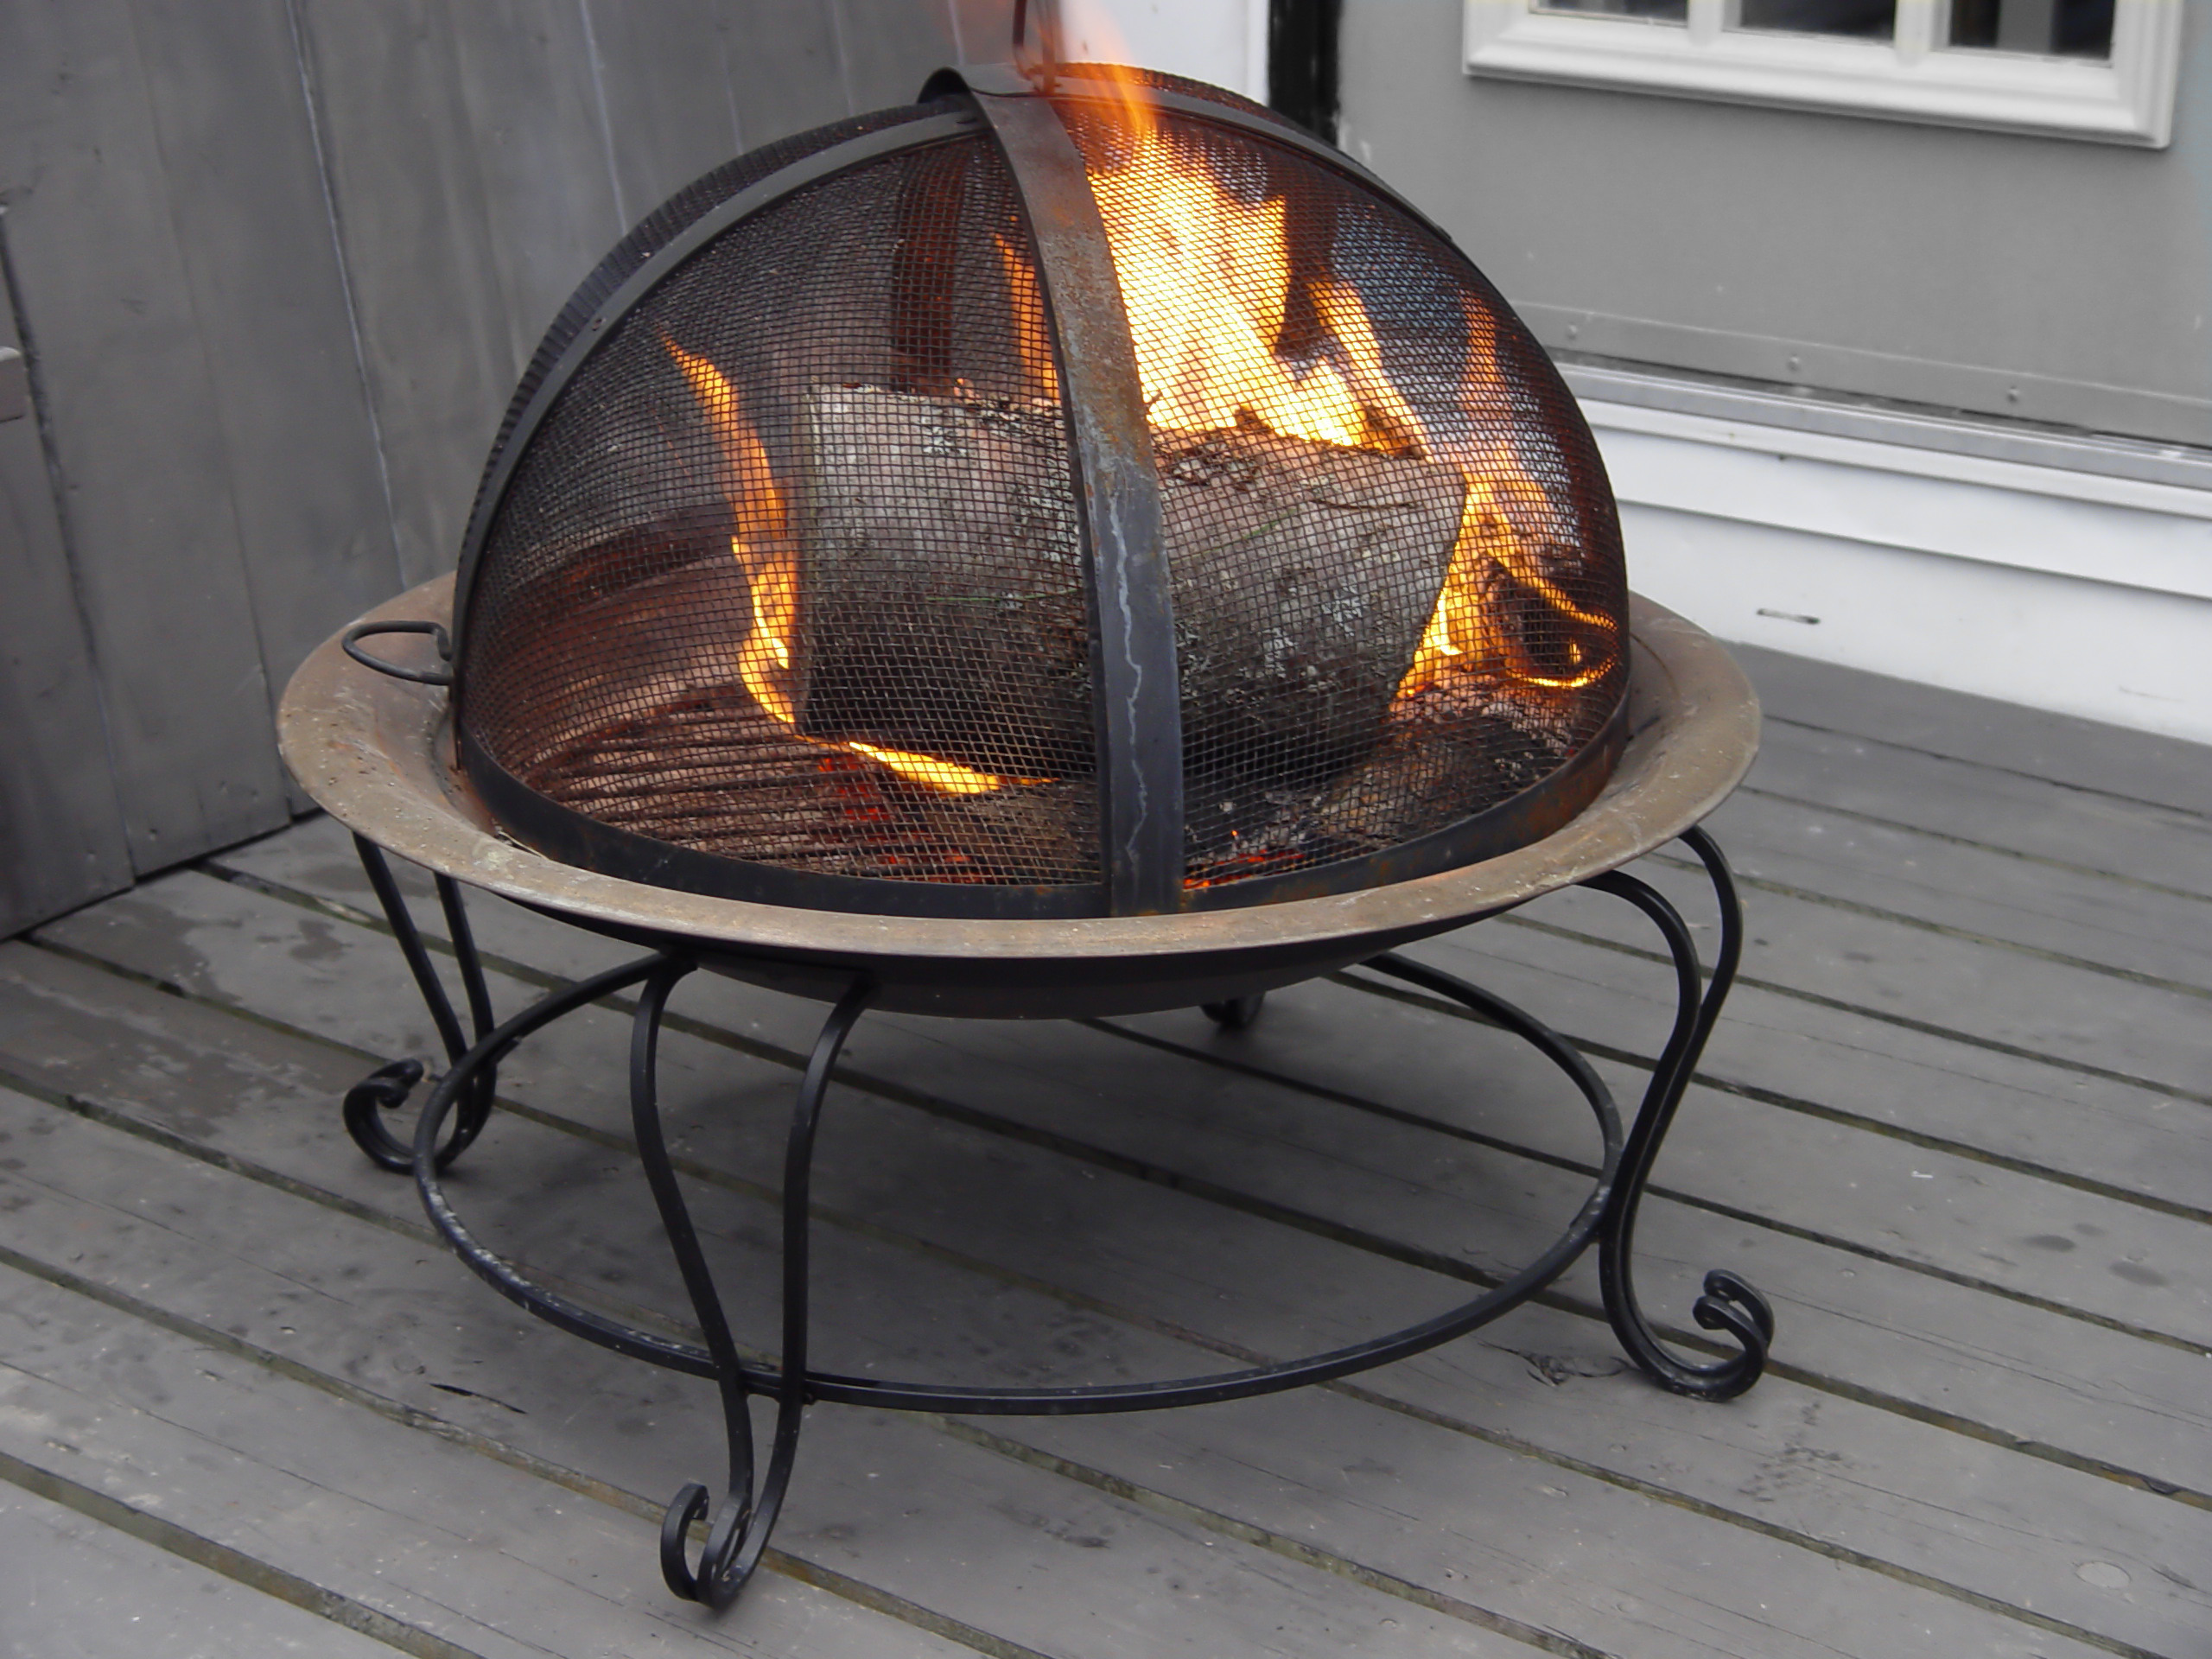 How Do You Fireproof A Timber Deck, Is It Safe To Put A Fire Pit On Deck